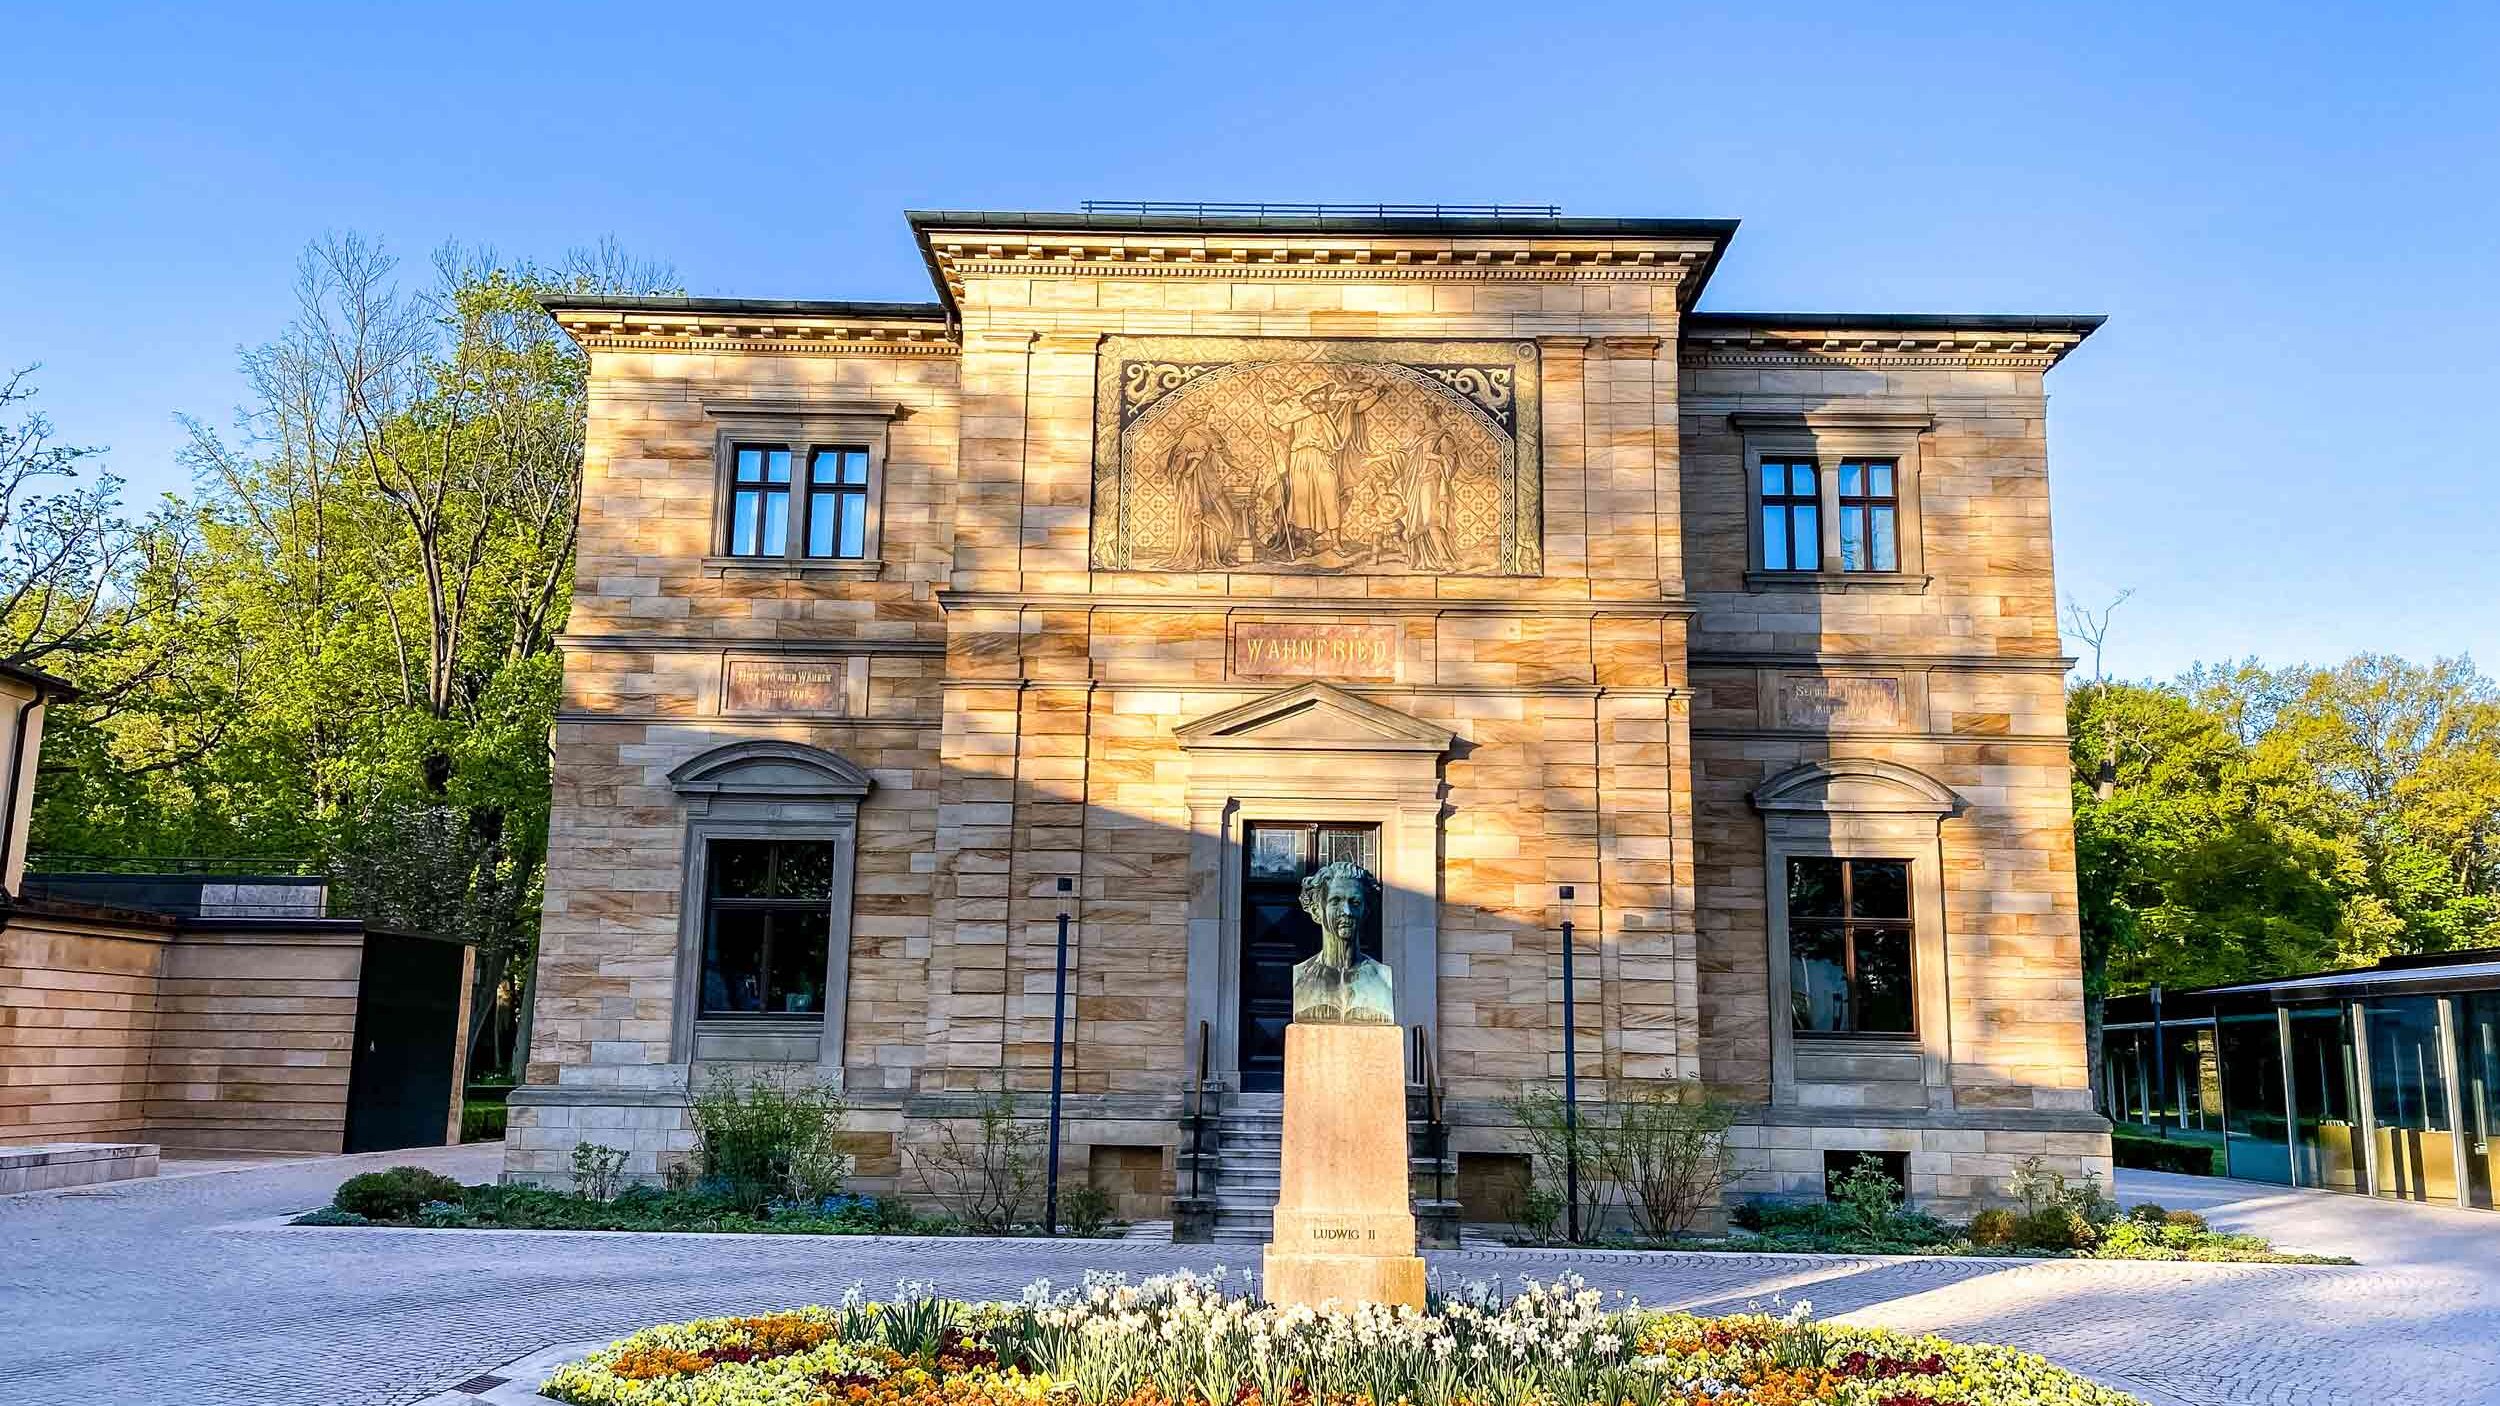 Haus Wahnfried - Richard-Wagner-Museum Bayreuth